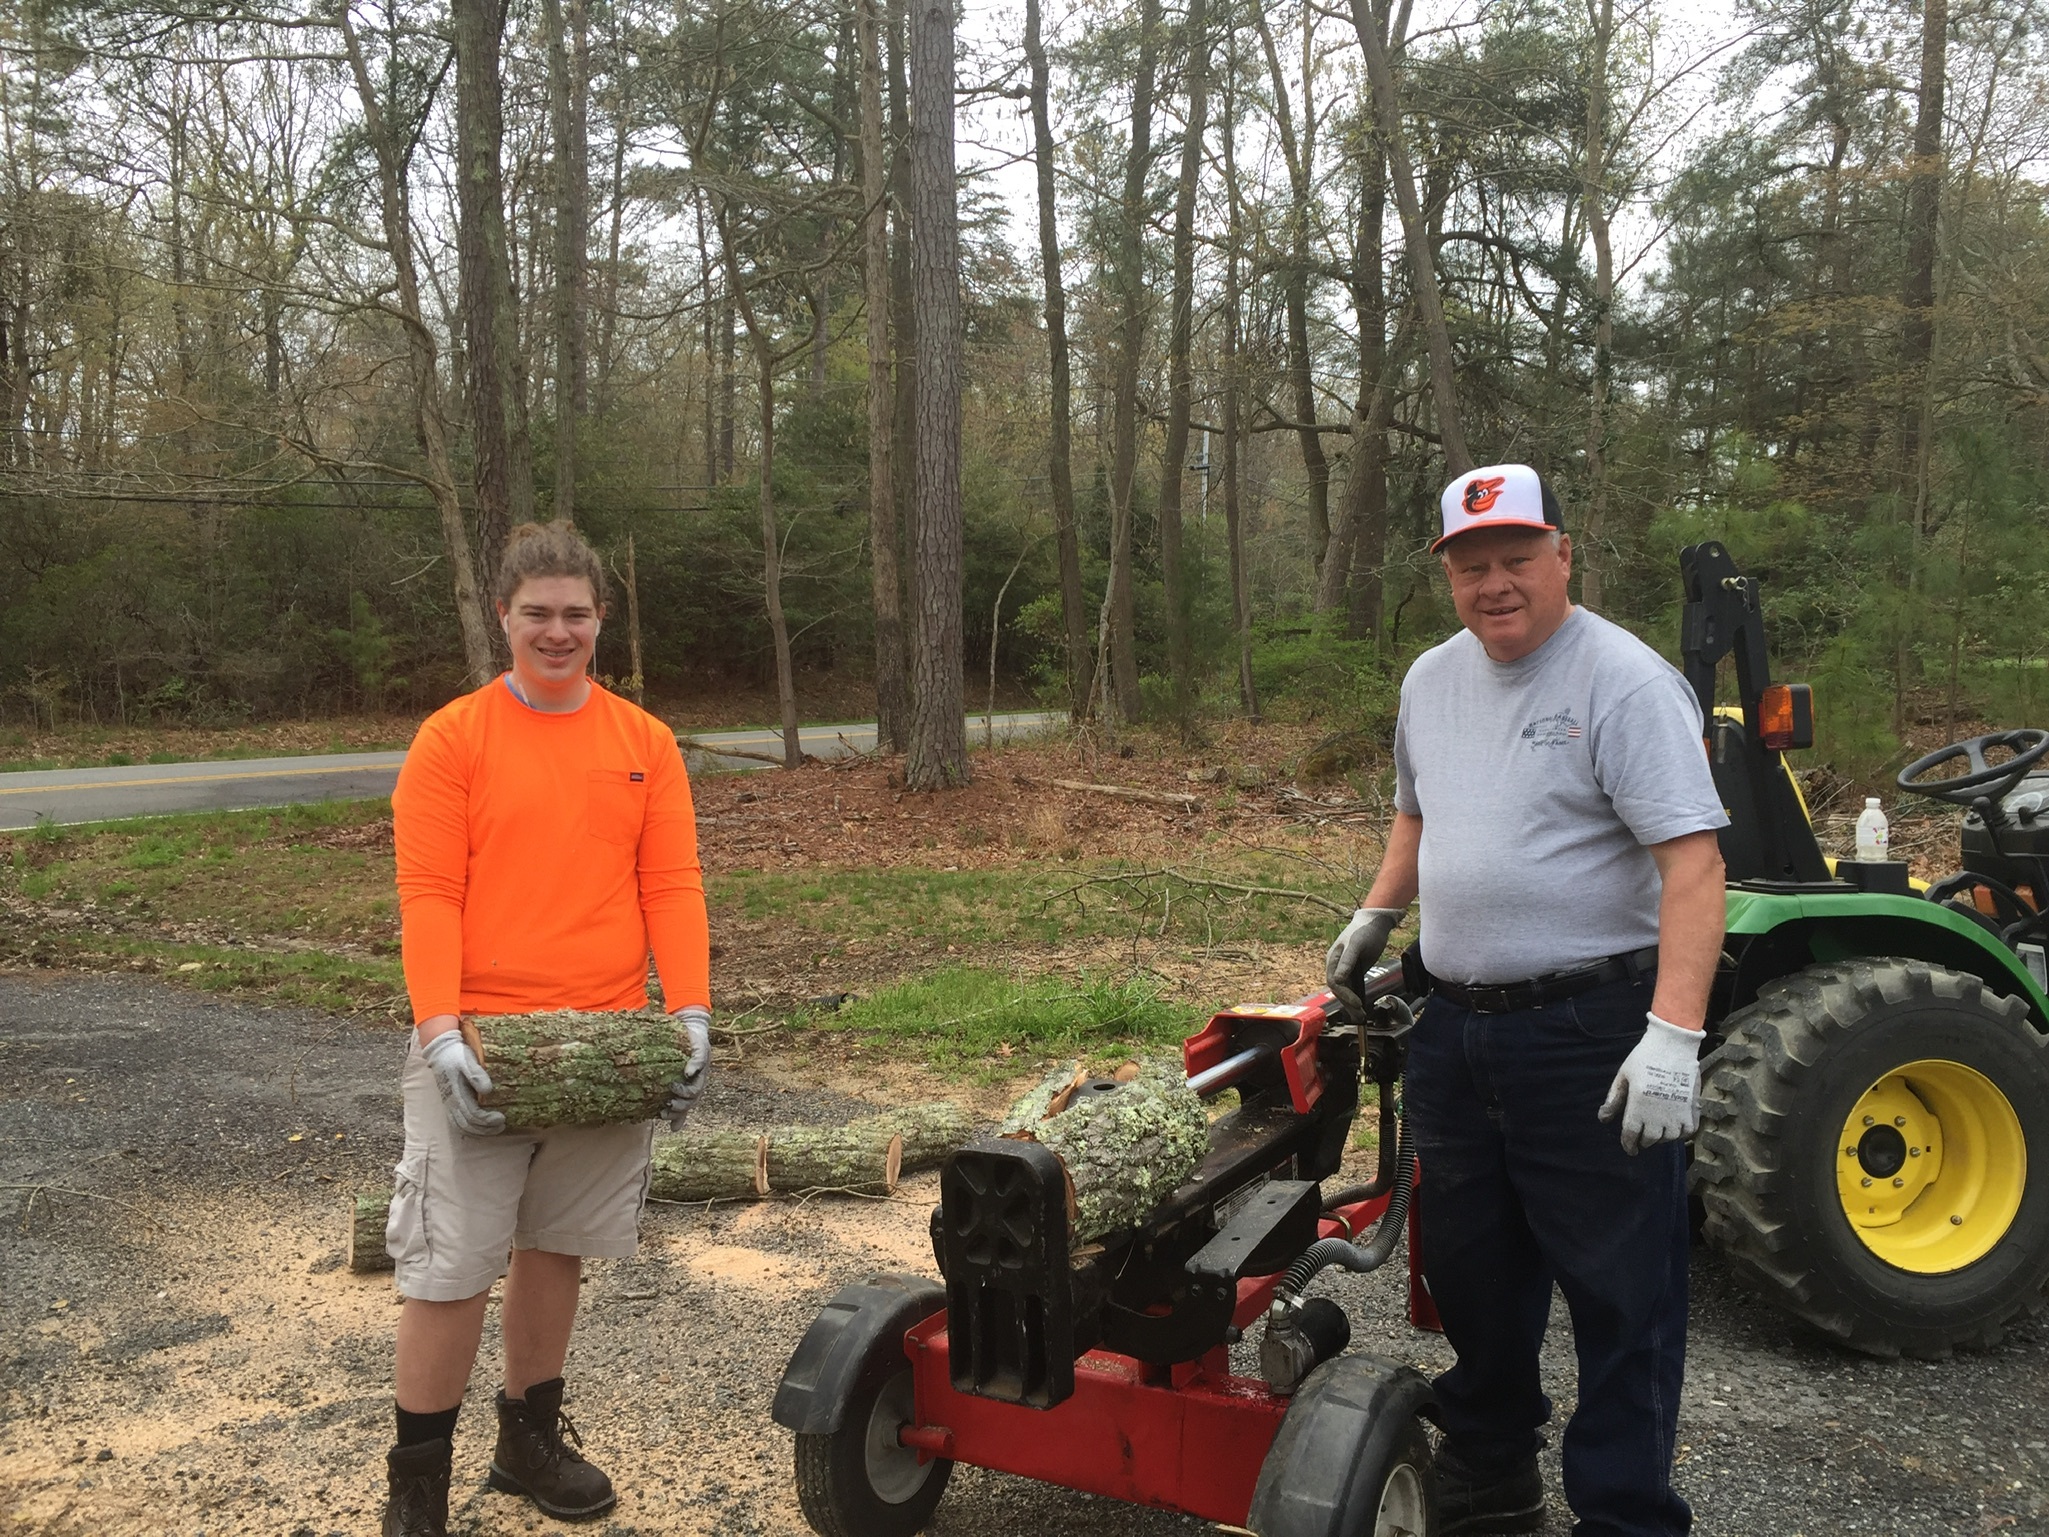 Peyton Ham, a 16-year-old from Leonardtown, Md, stands next to his grandfather, Keith Raley, while doing tree clearing work. Two days after this photo was taken Ham was shot and killed by a Maryland State Police trooper.